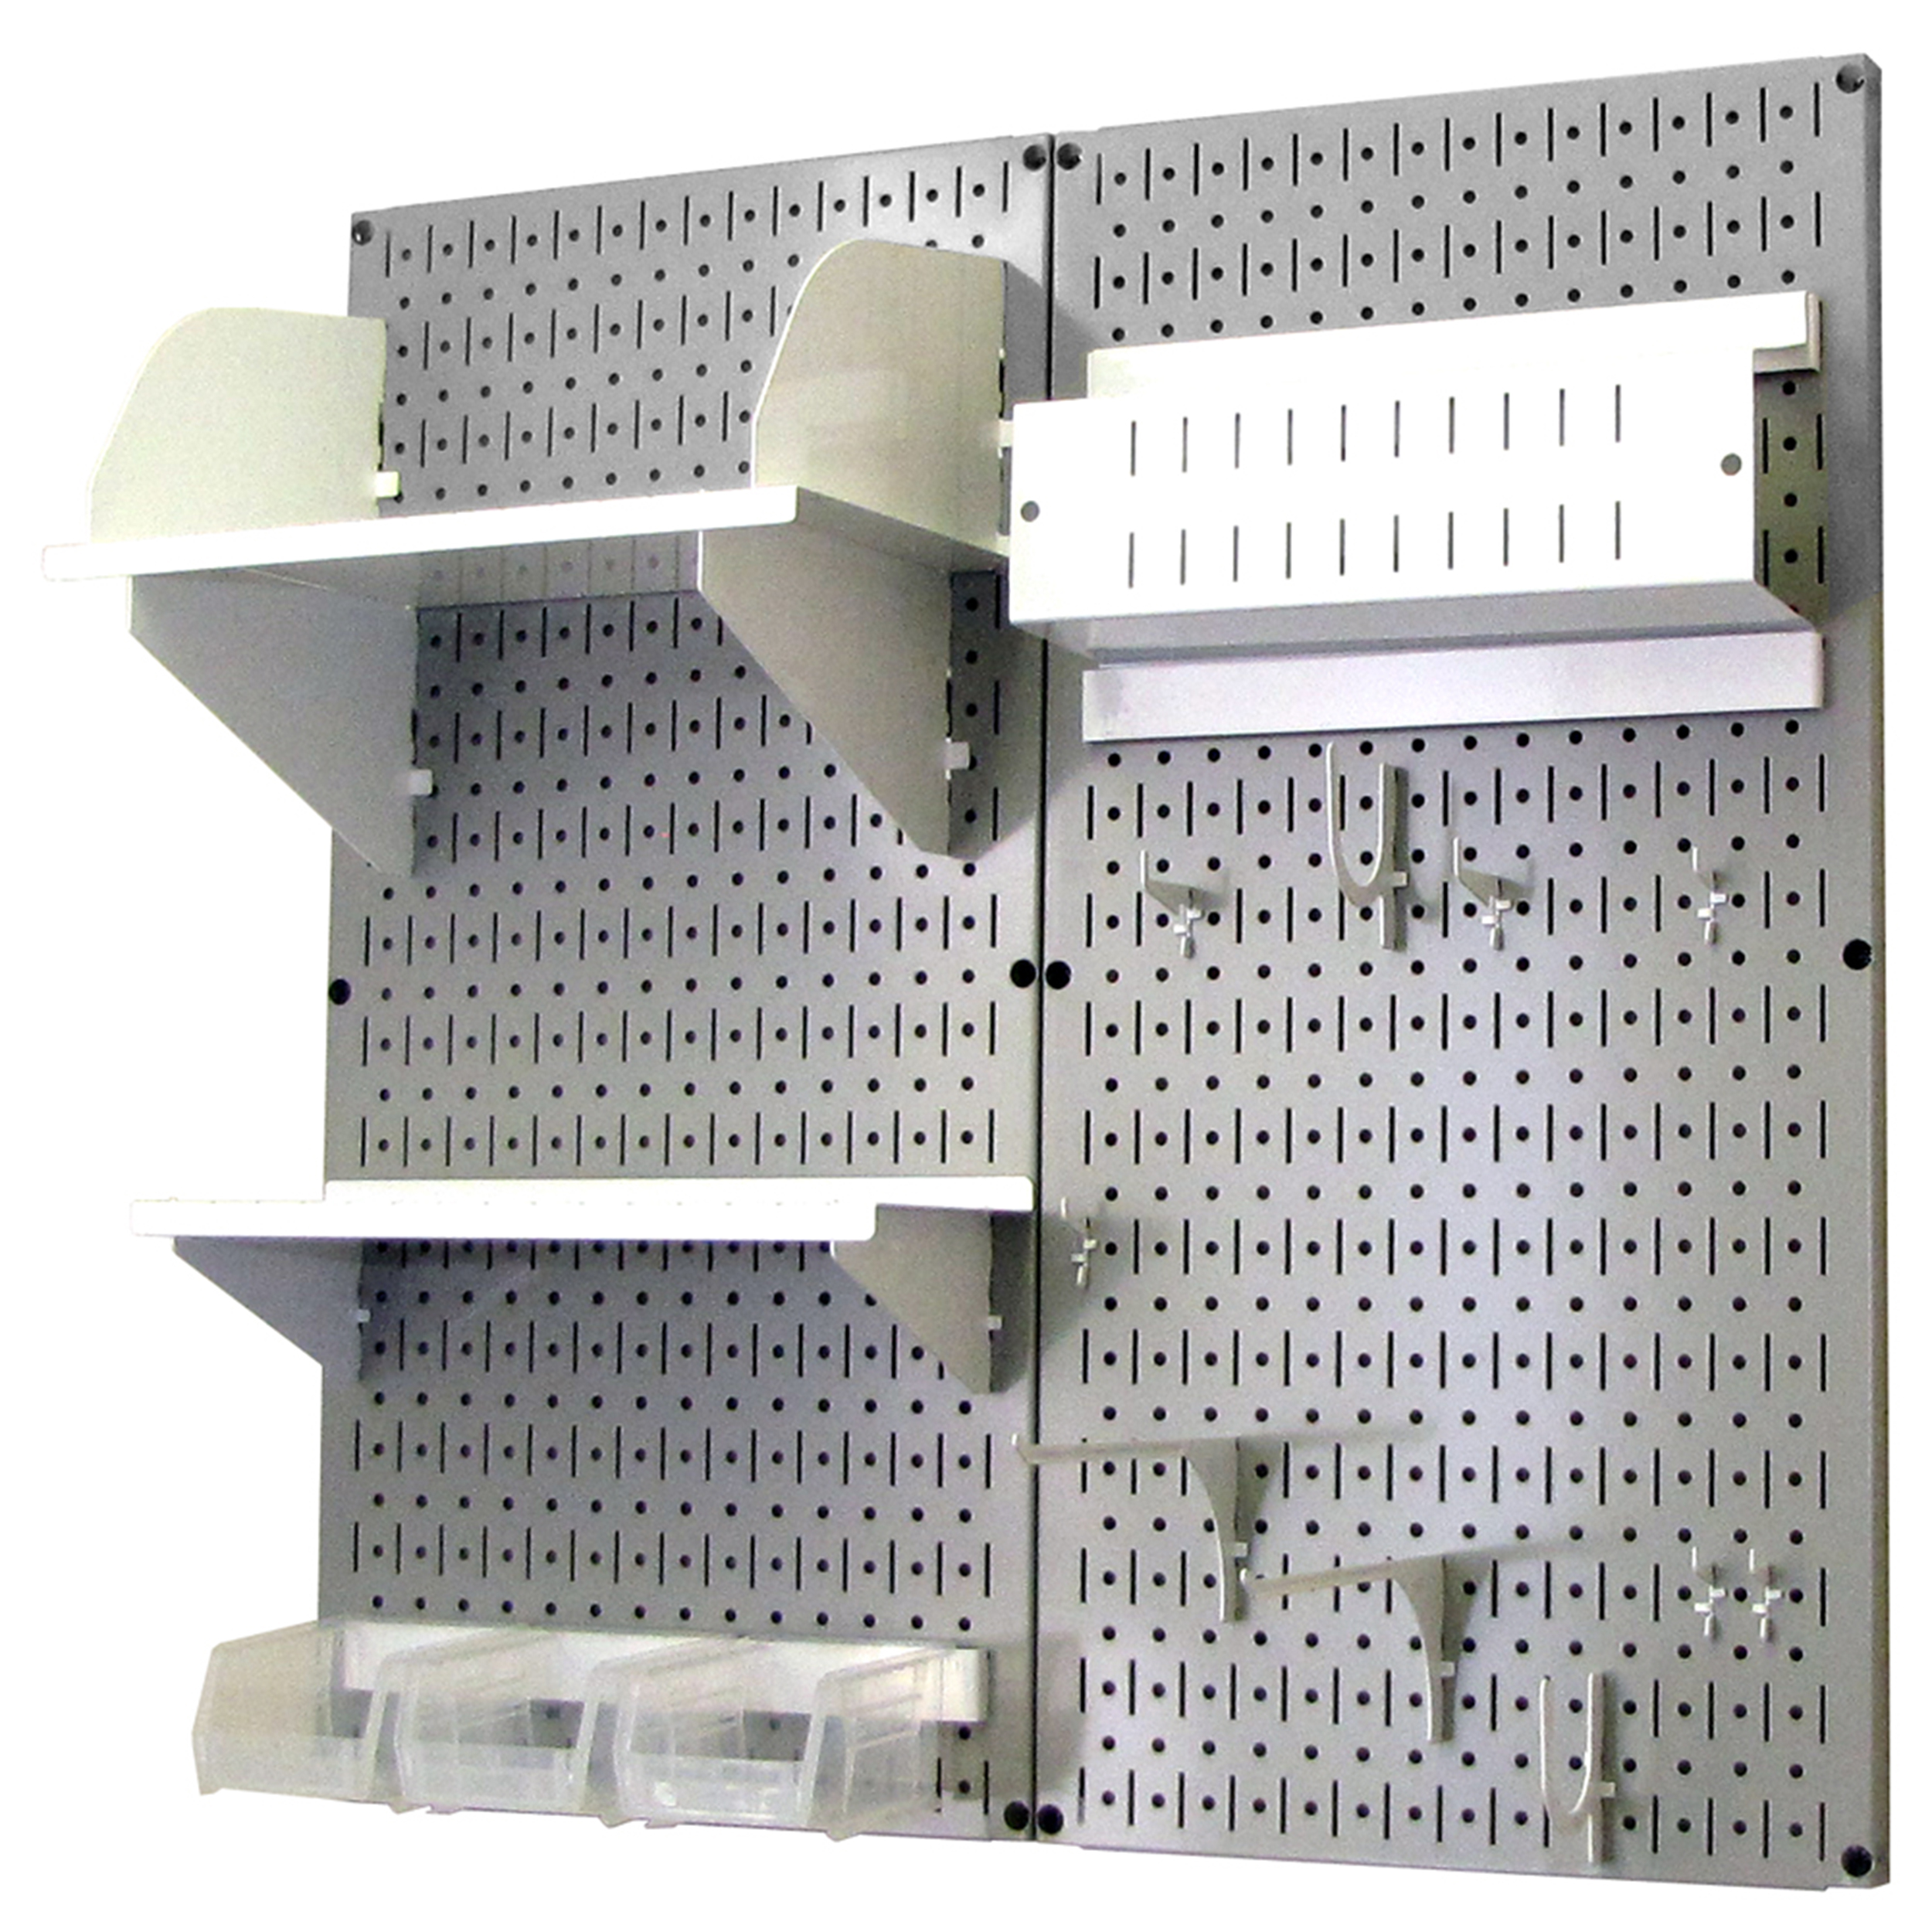 Pegboard Hobby Craft Pegboard Organizer Storage Kit With Gray Pegboard And White Accessories